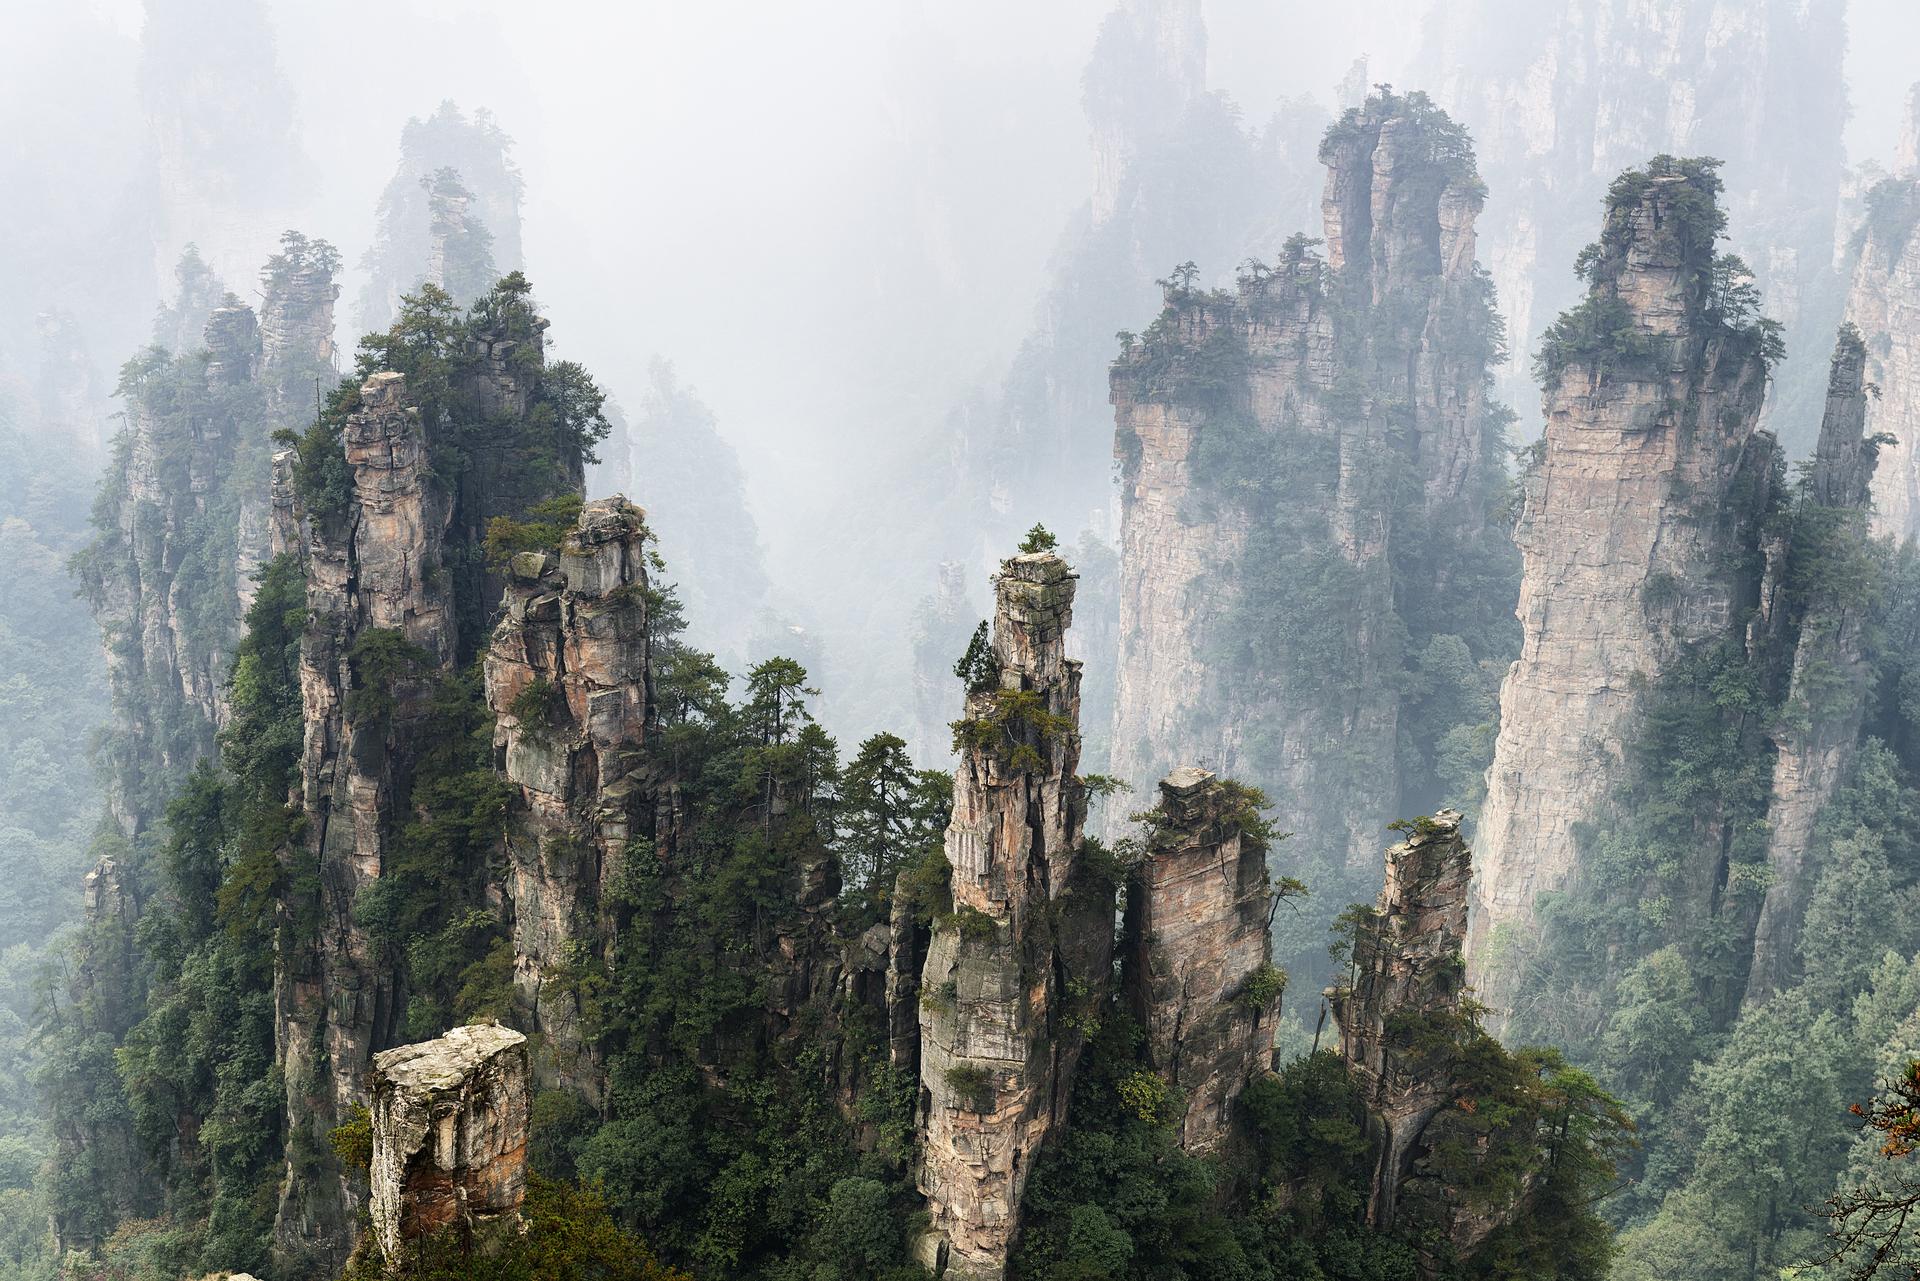 A single day of trekking in the "scraggy, foggy mountains of Zhangjiajie" was too much for the writer. Photos: Corbis; Xinhua; Cecilie Gamst Berg